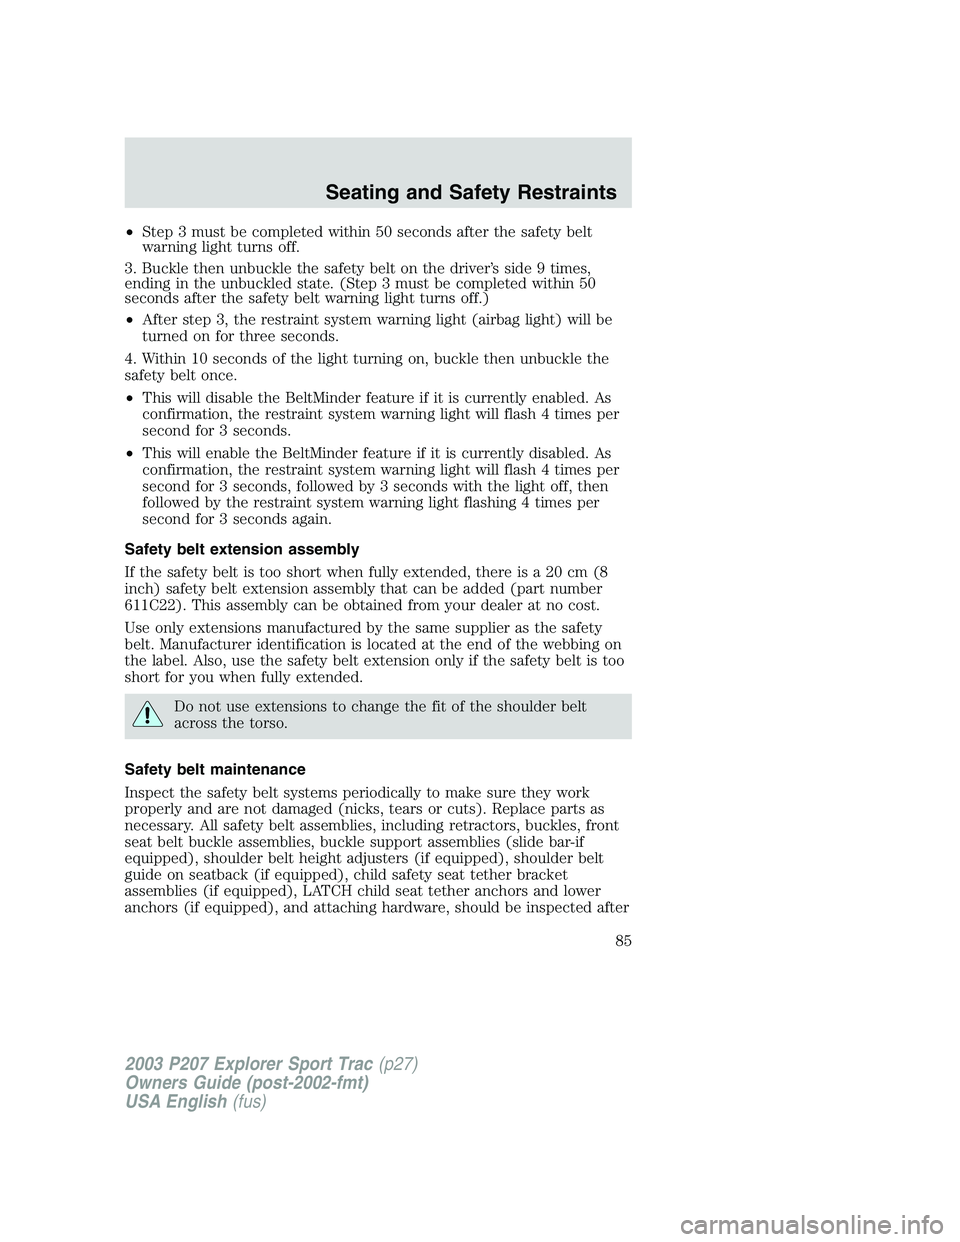 FORD EXPLORER SPORT TRAC 2003  Owners Manual •Step 3 must be completed within 50 seconds after the safety belt
warning light turns off.
3. Buckle then unbuckle the safety belt on the driver’s side 9 times,
ending in the unbuckled state. (Ste